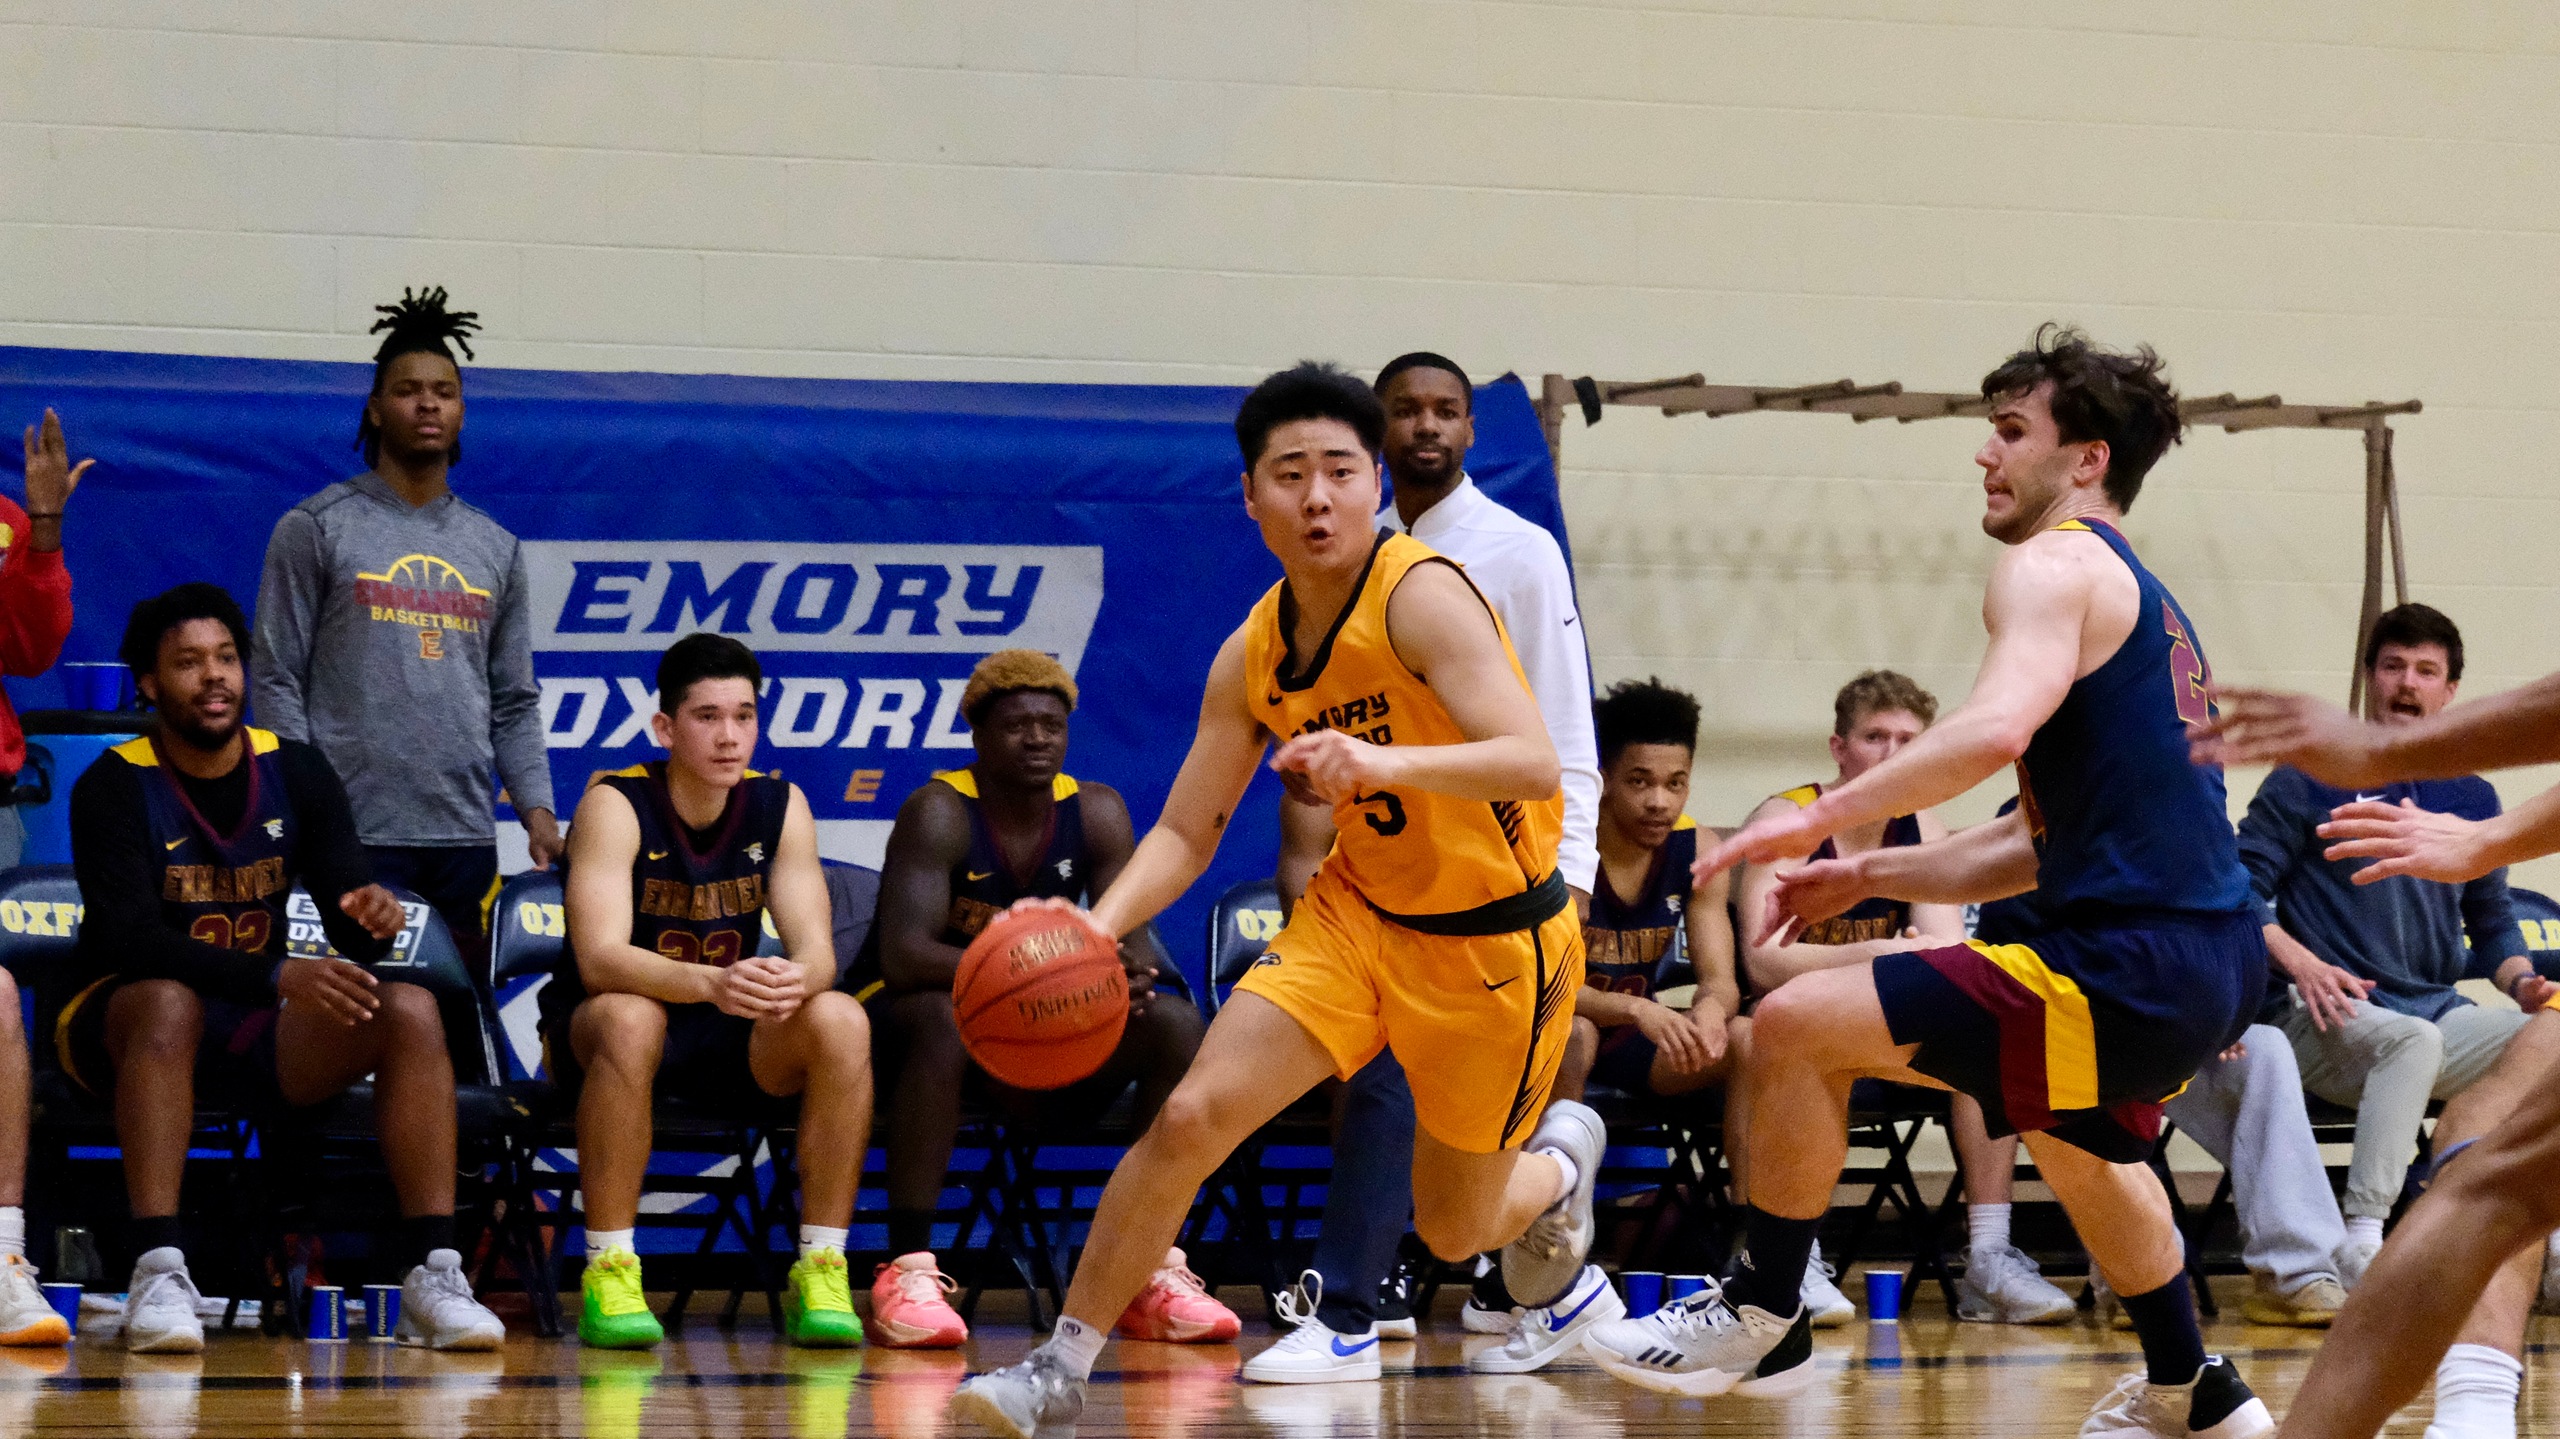 Men's basketball drops conference game in overtime 75-73